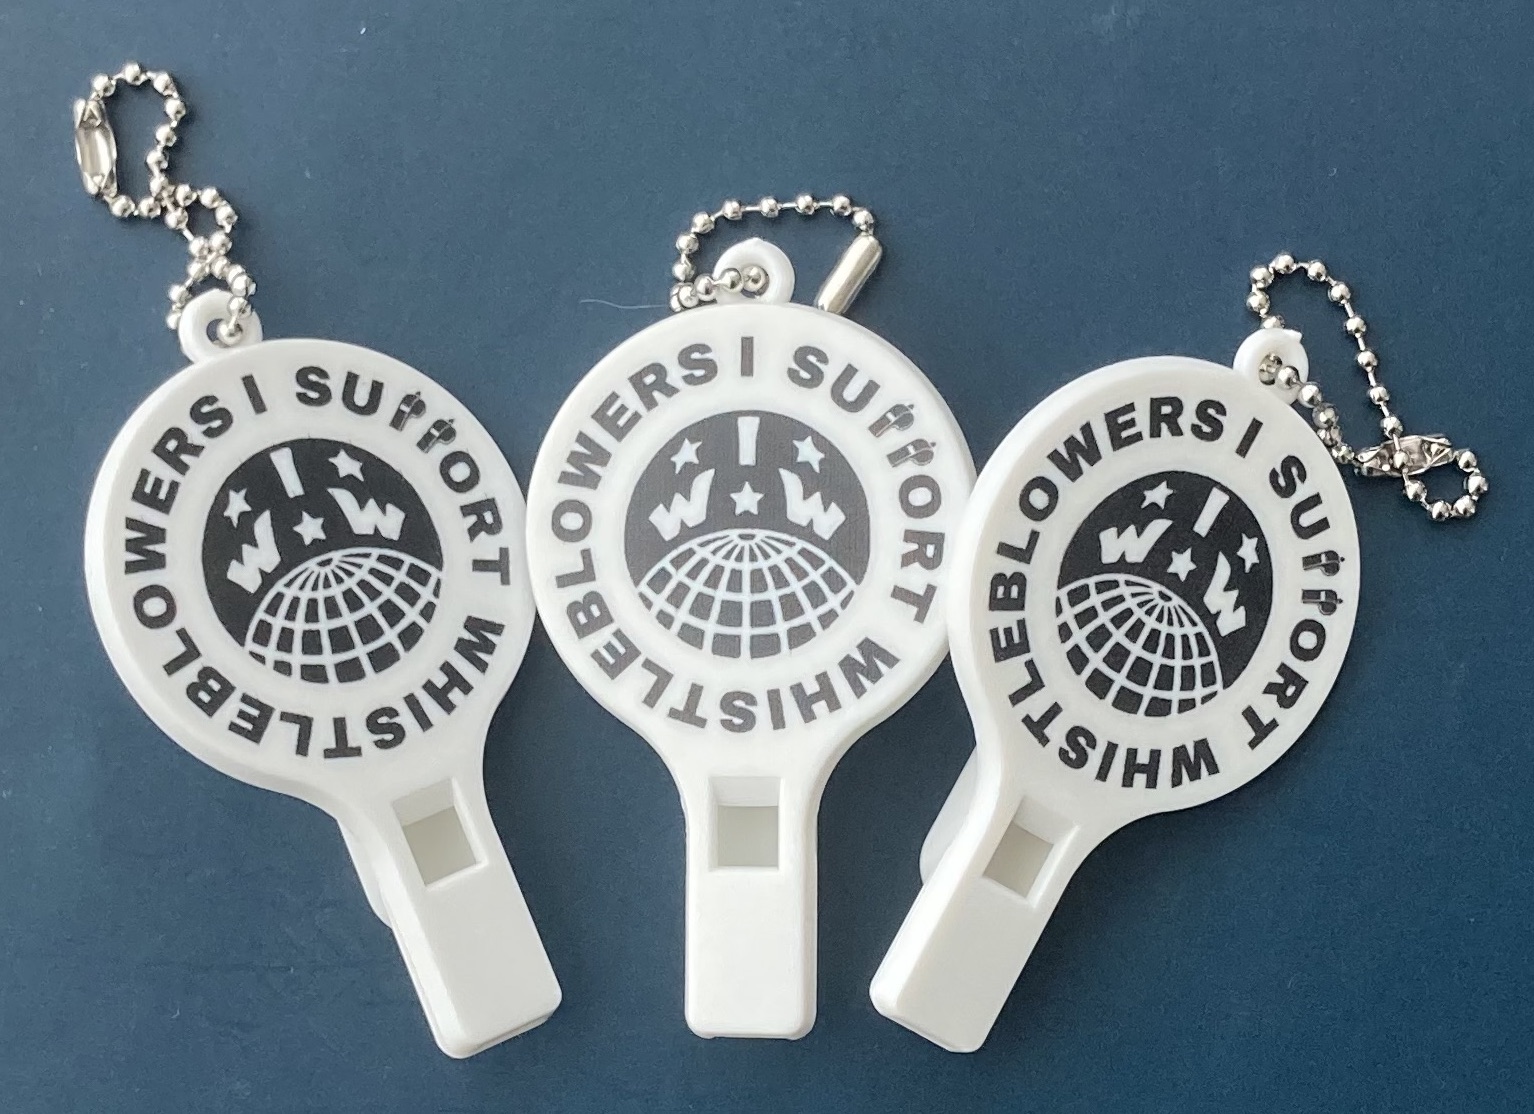 Image shows three whistles. On each is the IWW logo and around it, it says "I support whistleblowers"